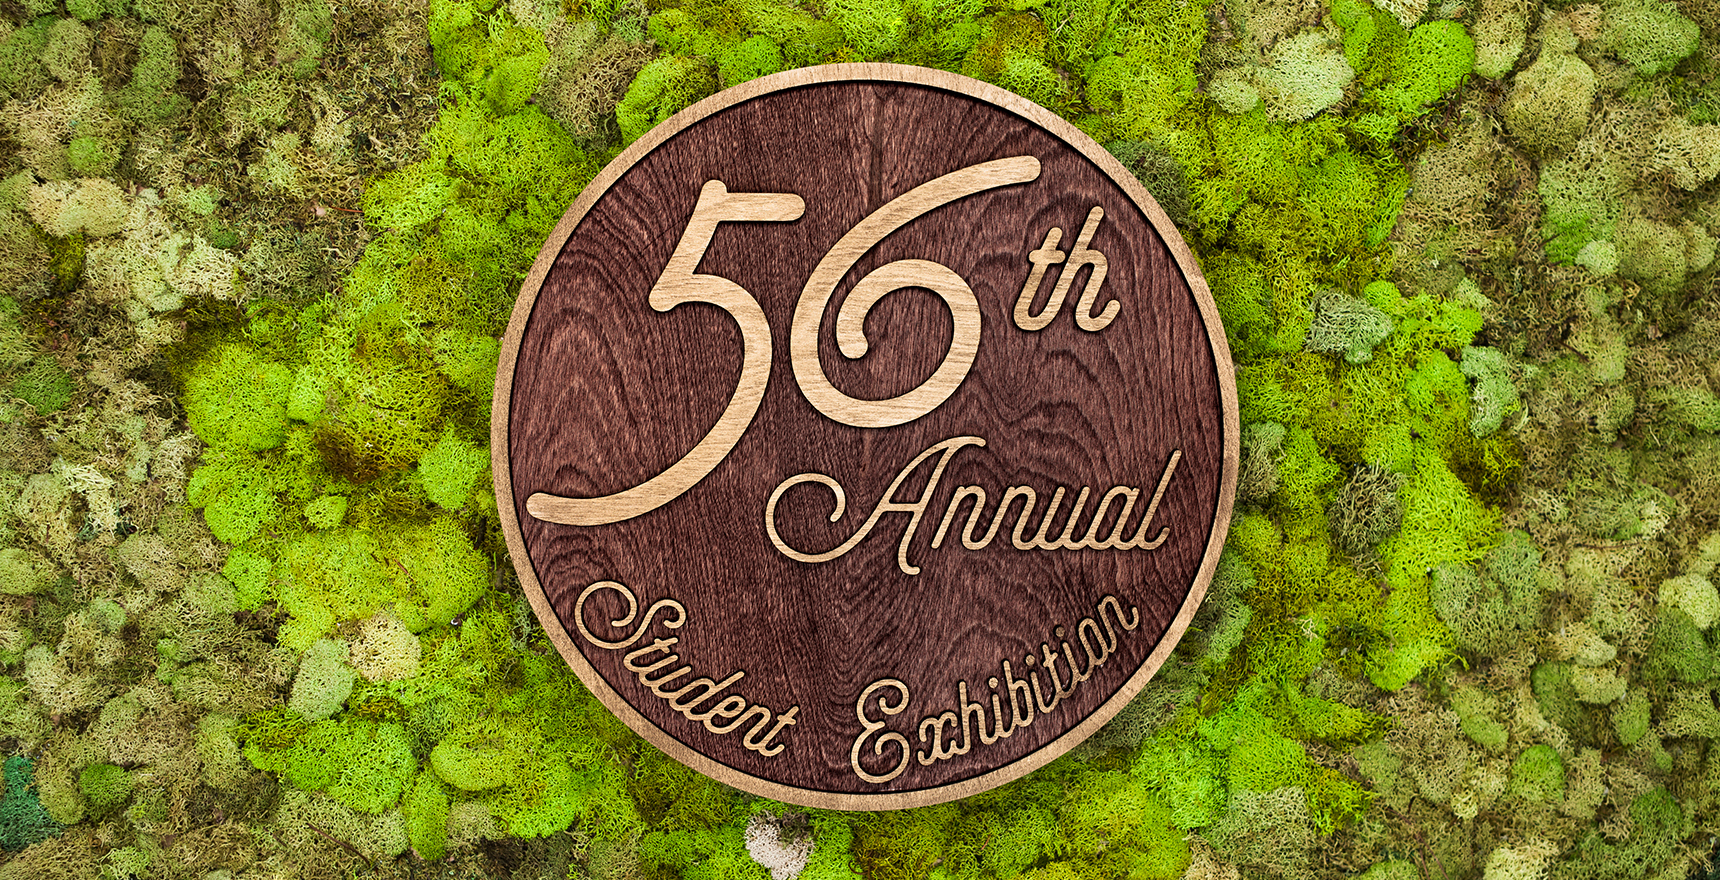 56th Annual Student Exhibition